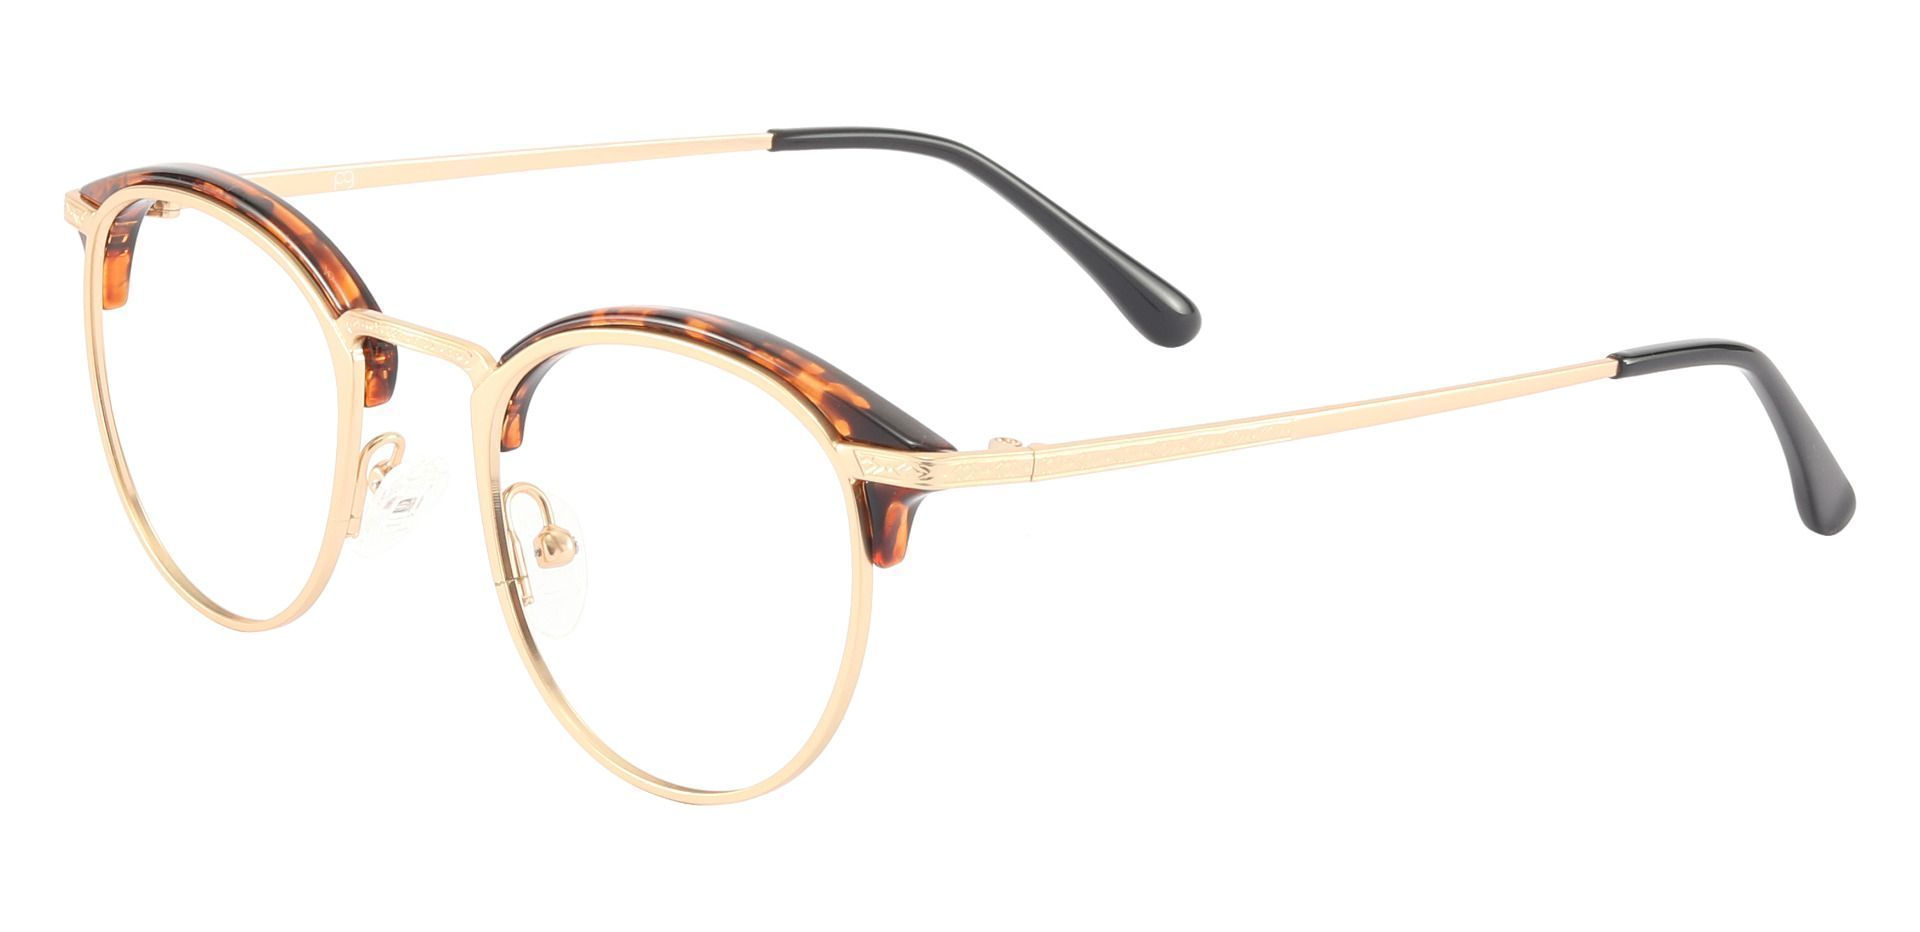 Shultz Browline Lined Bifocal Glasses - Gold